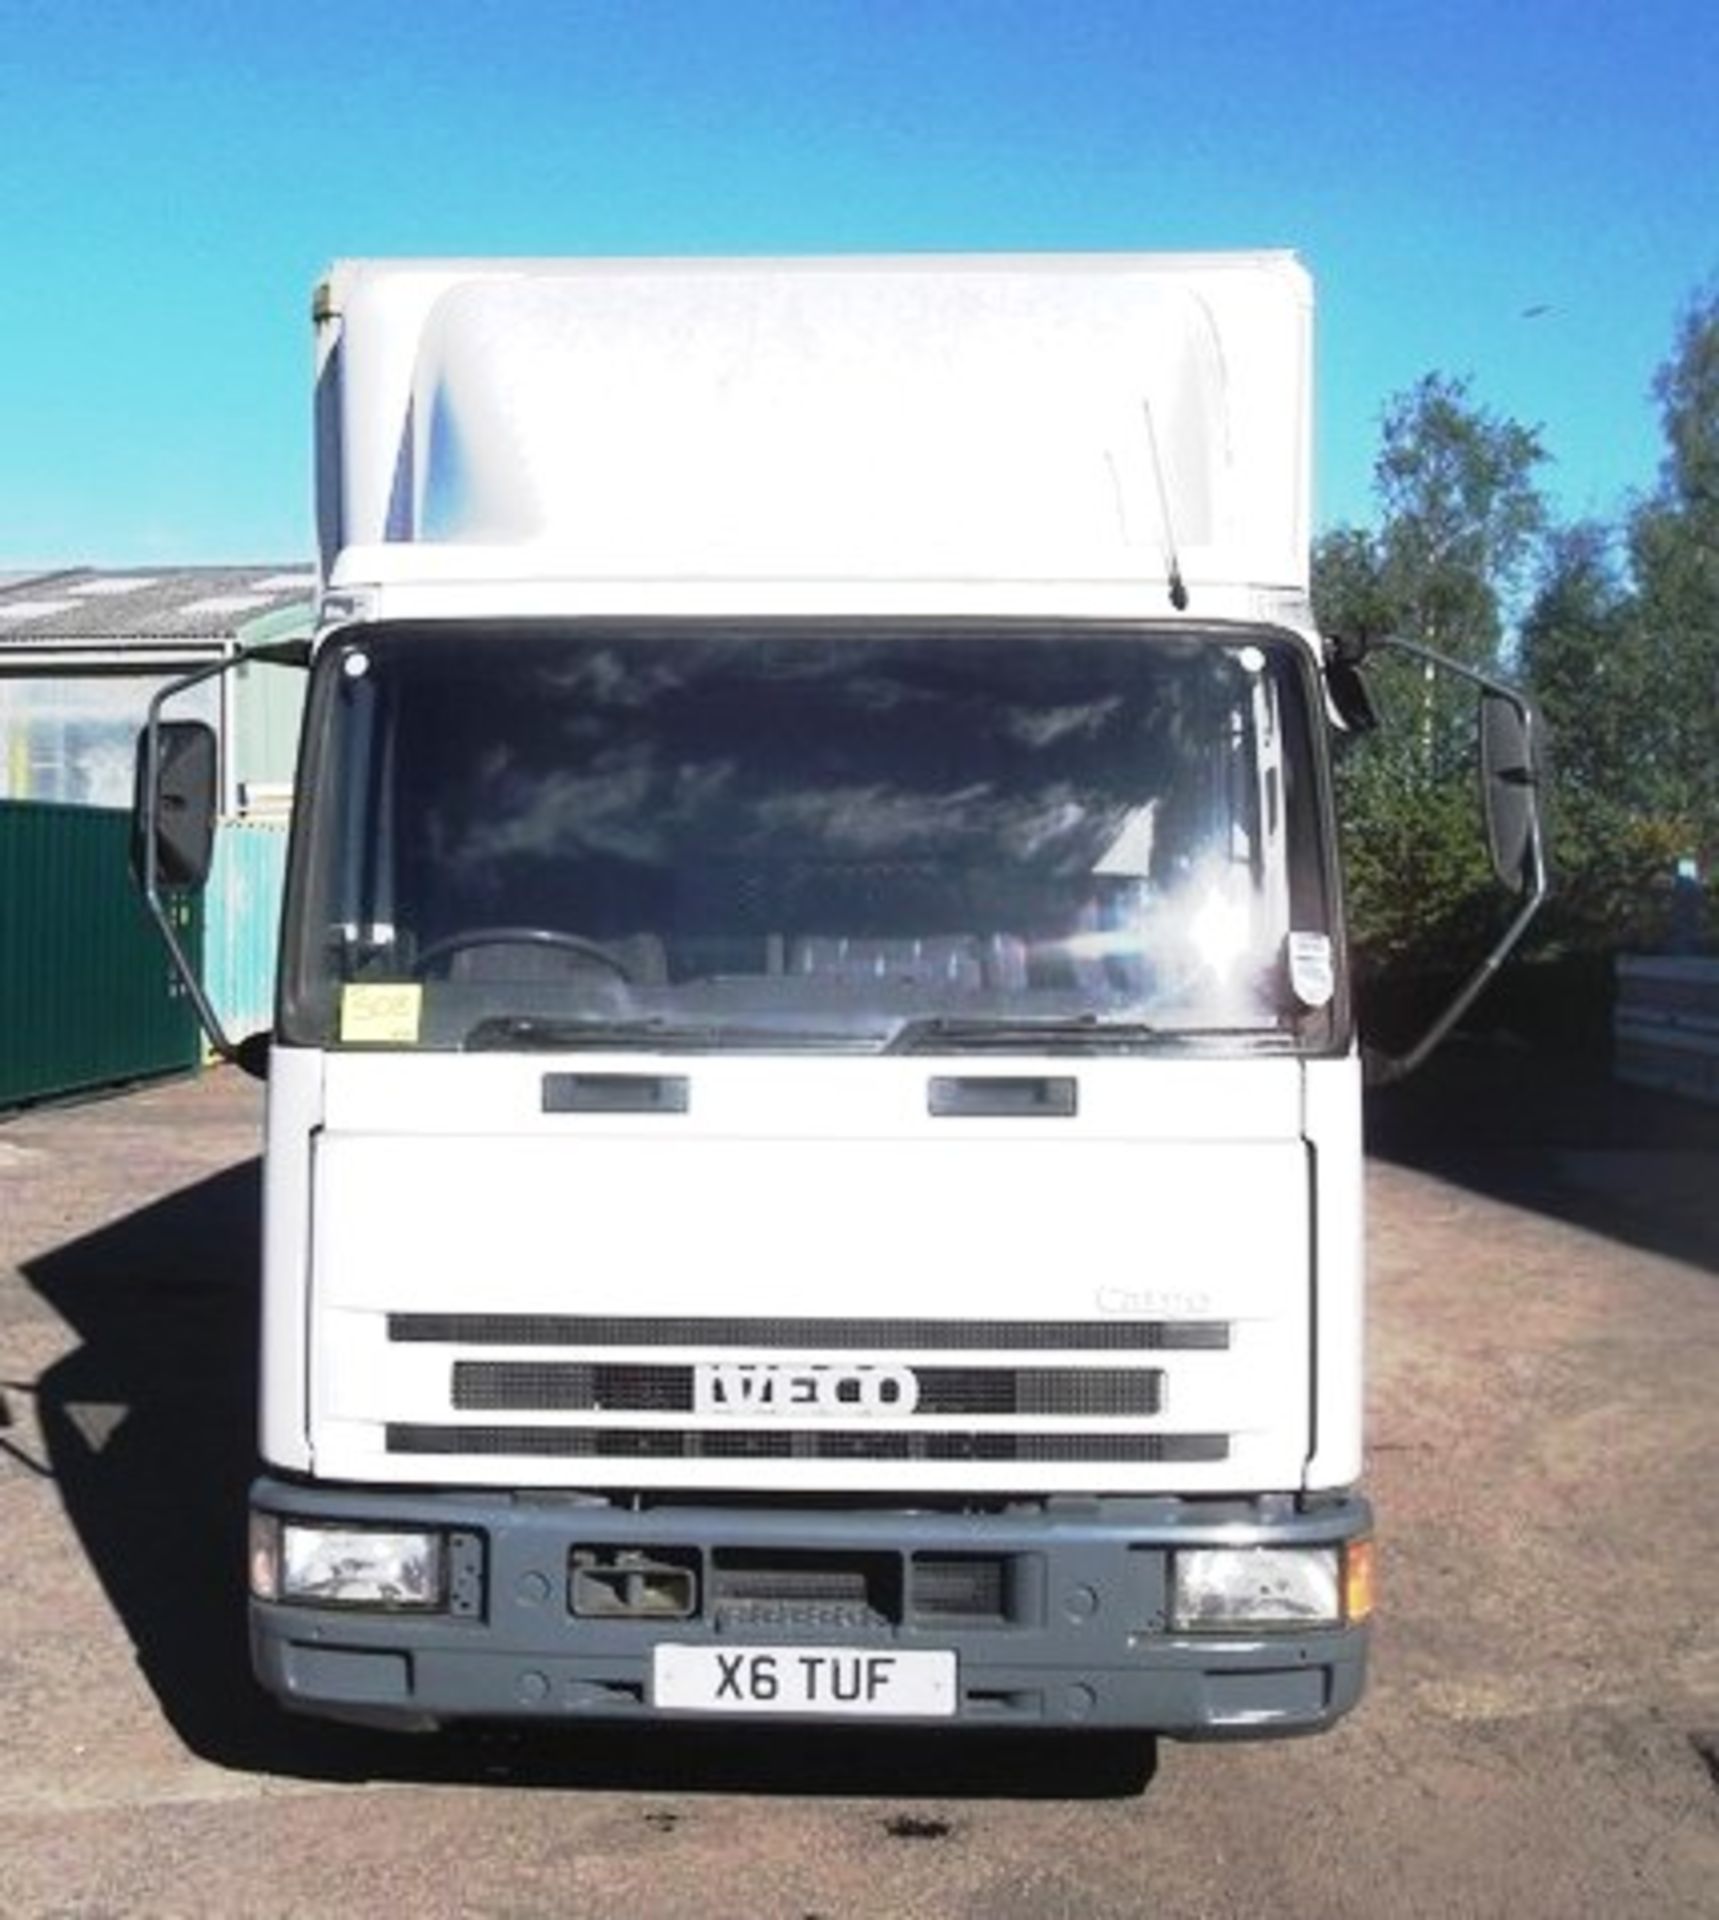 IVECO-FORD CARGO TECTOR - 3920cc
Body: 2 Dr Van
Color: White
First Reg: 05/03/2004
Doors: 2
MOT: - Image 6 of 20